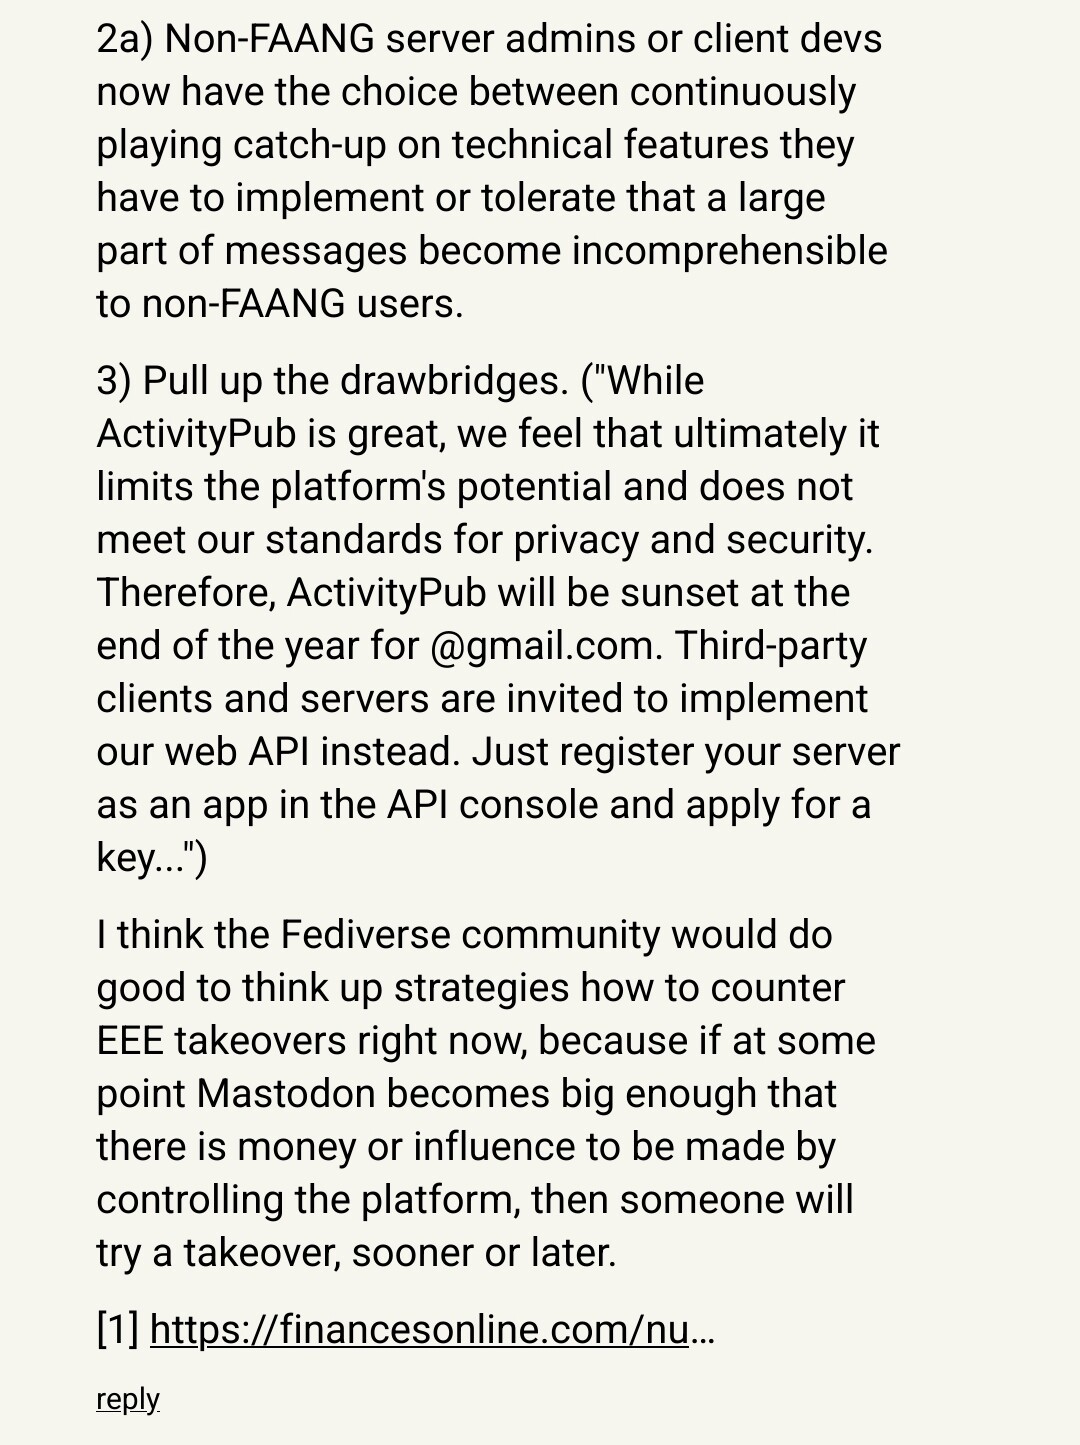 2a) Non-FAANG server admins or client devs now have the choice between continuously playing catch-up on technical features they have to implement or tolerate that a large part of messages become incomprehensible to non-FAANG users.

3) Pull up the drawbridges. ("While ActivityPub is great, we feel that ultimately it limits the platform's potential and does not meet our standards for privacy and security. Therefore, ActivityPub will be sunset at the end of the year for @gmail.com. Third-party clients and servers are invited to implement our web API instead. Just register your server as an app in the API console and apply for a key...")

I think the Fediverse community would do good to think up strategies how to counter EEE takeovers right now, because if at some point Mastodon becomes big enough that there is money or influence to be made by controlling the platform, then someone will try a takeover, sooner or later.